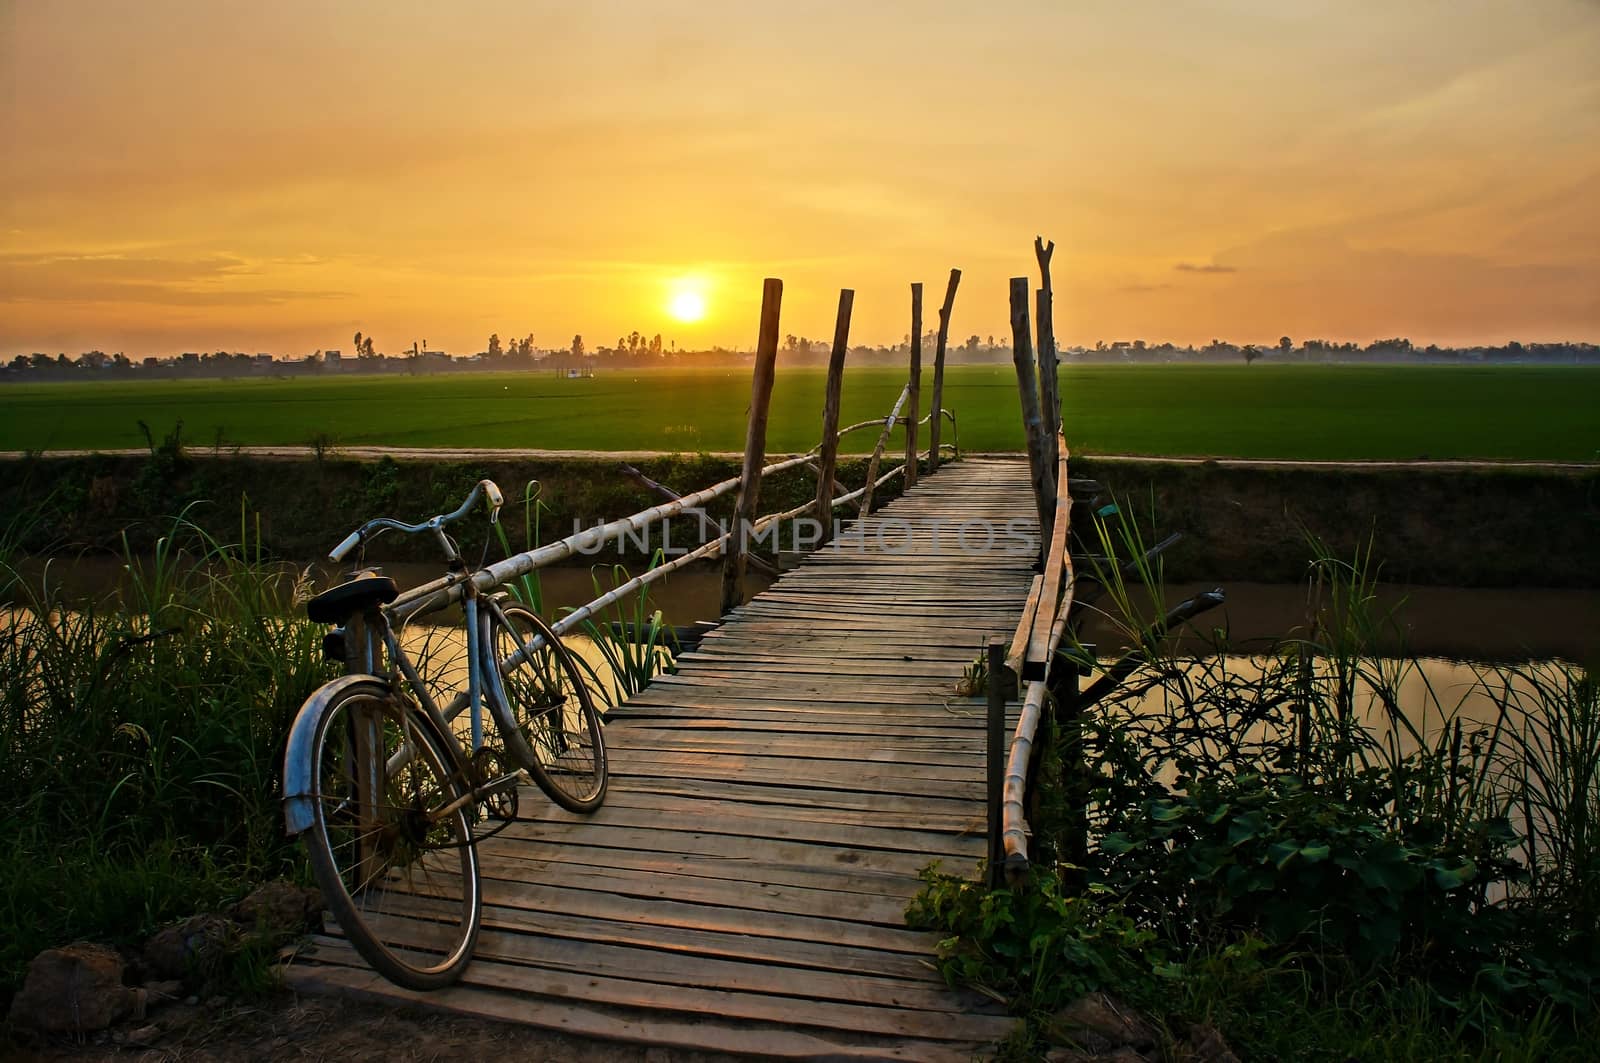 Bicycle on wooden fence of bridge at sunset by xuanhuongho